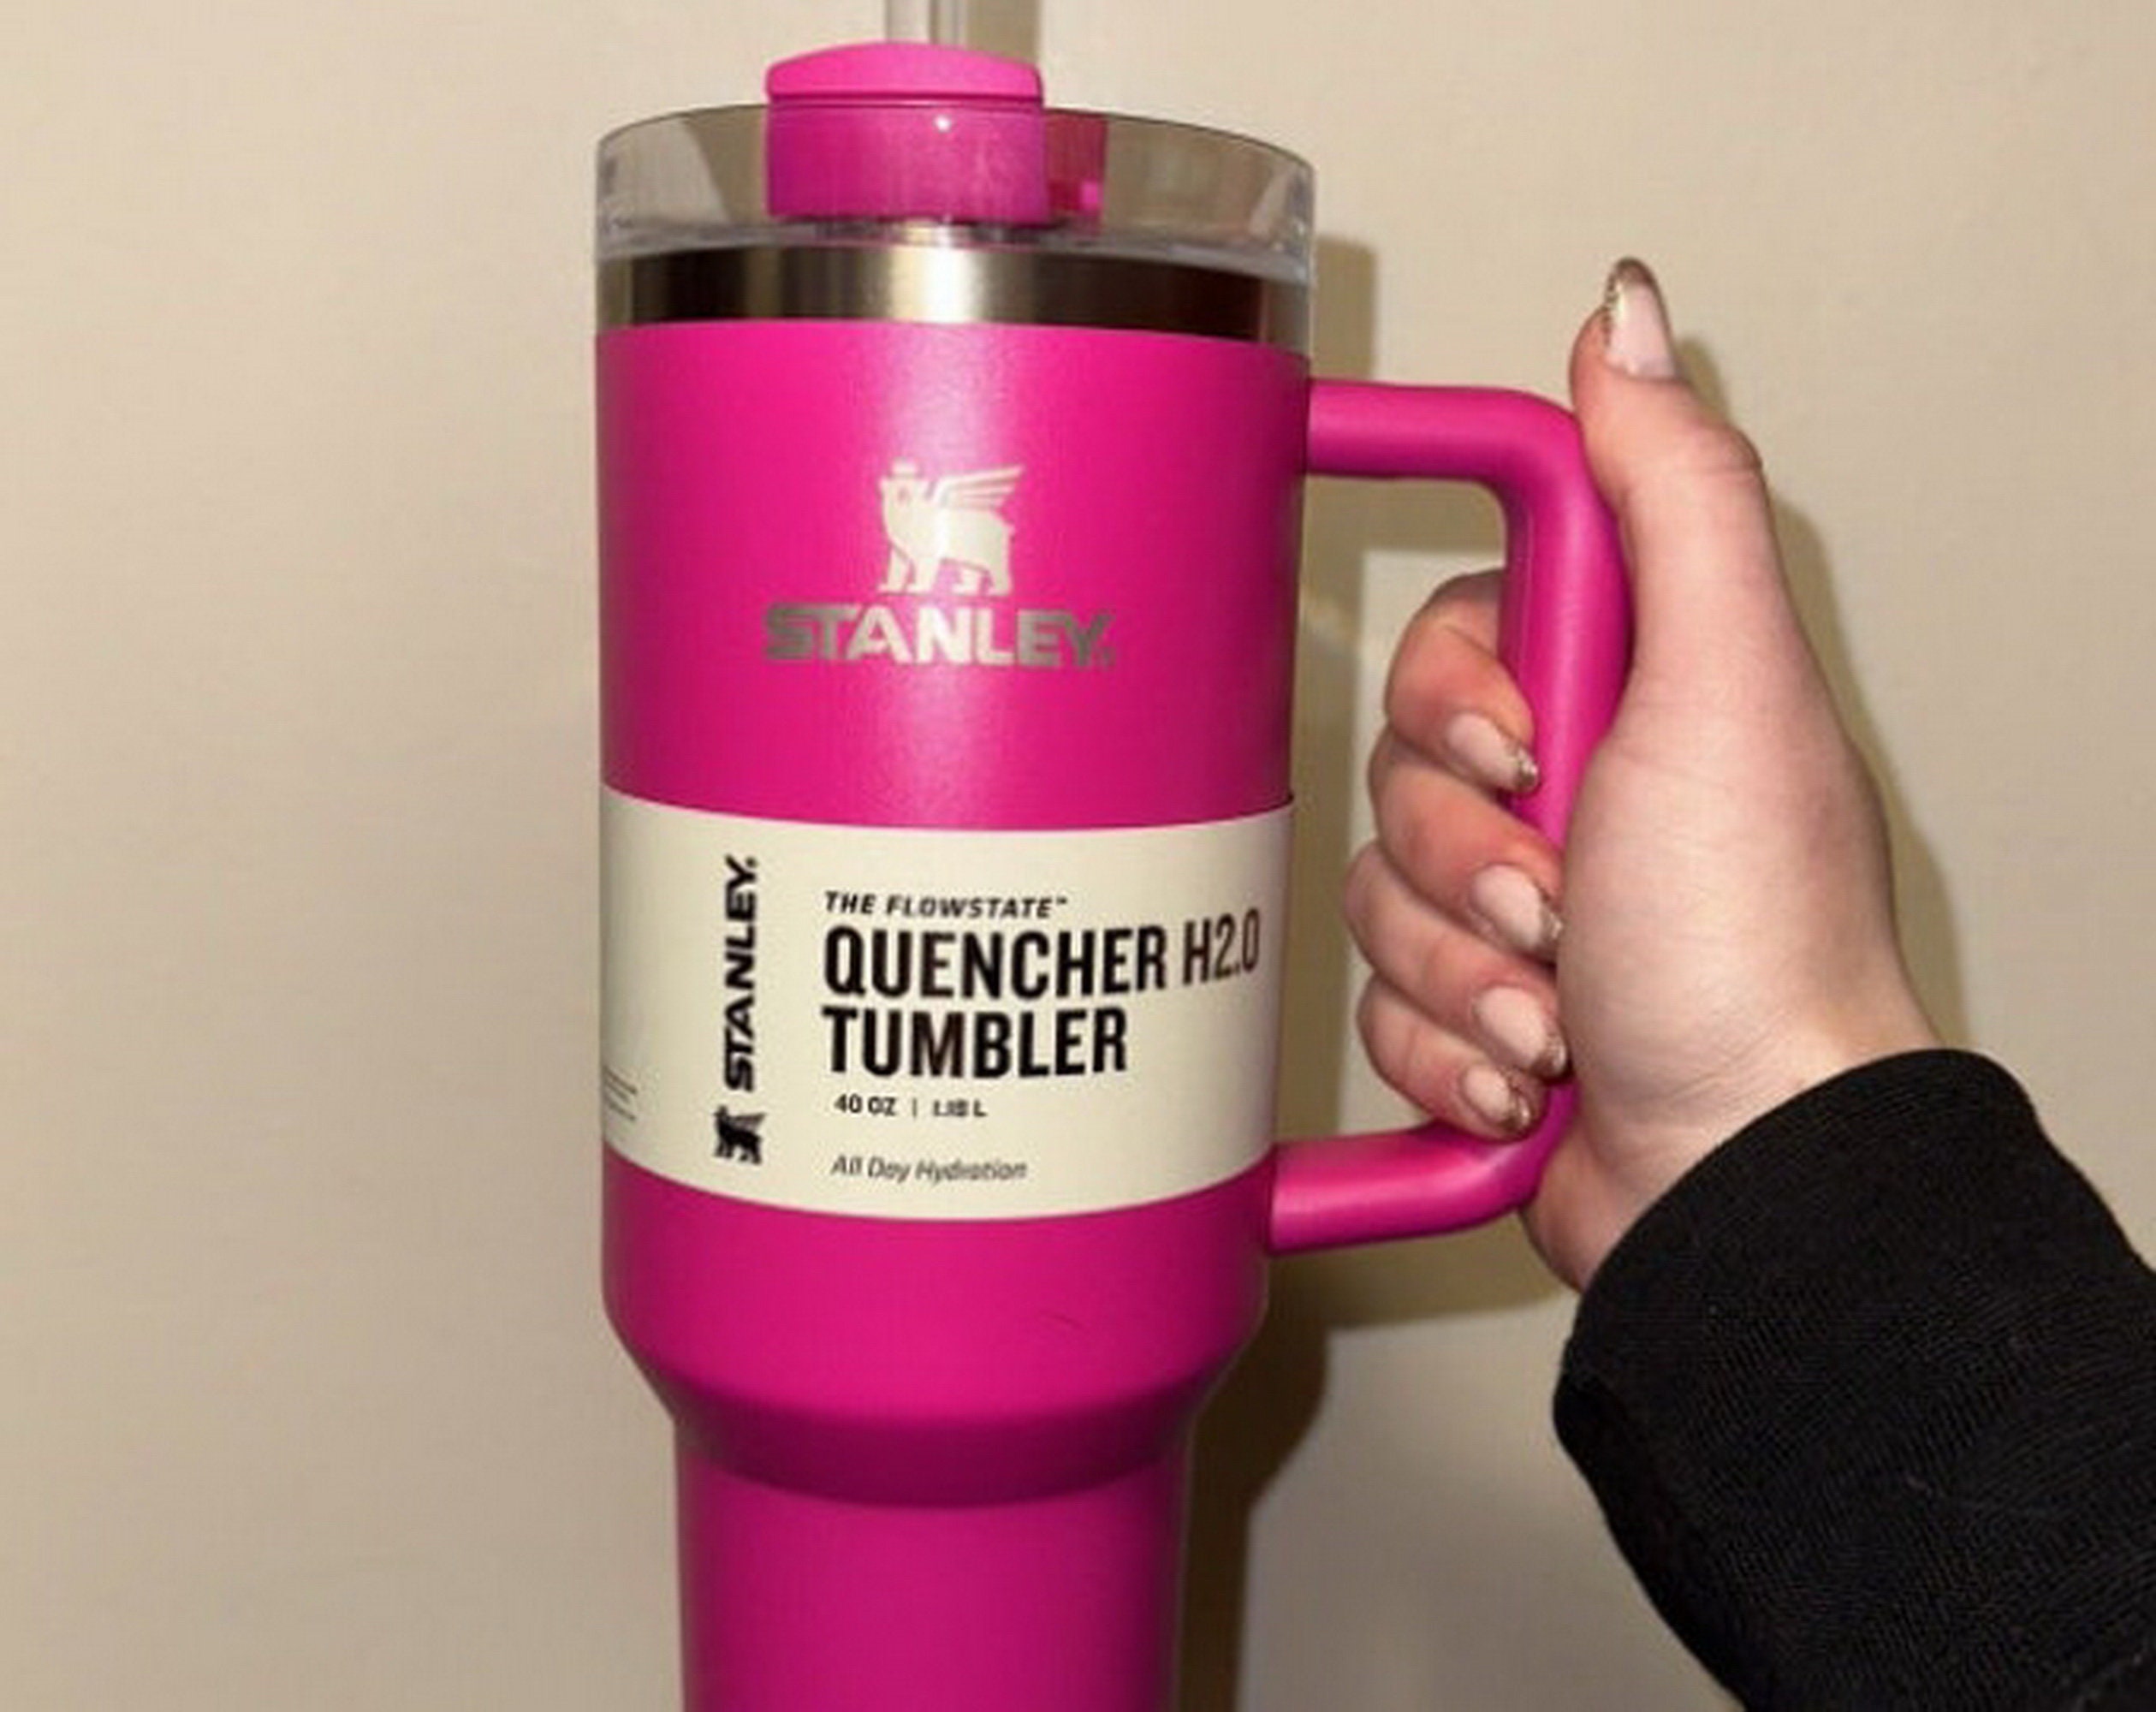 Stanley Tumbler 30oz The Flowstate Quencher H2.0 Camelia Gradient Ombre Pink  for sale online